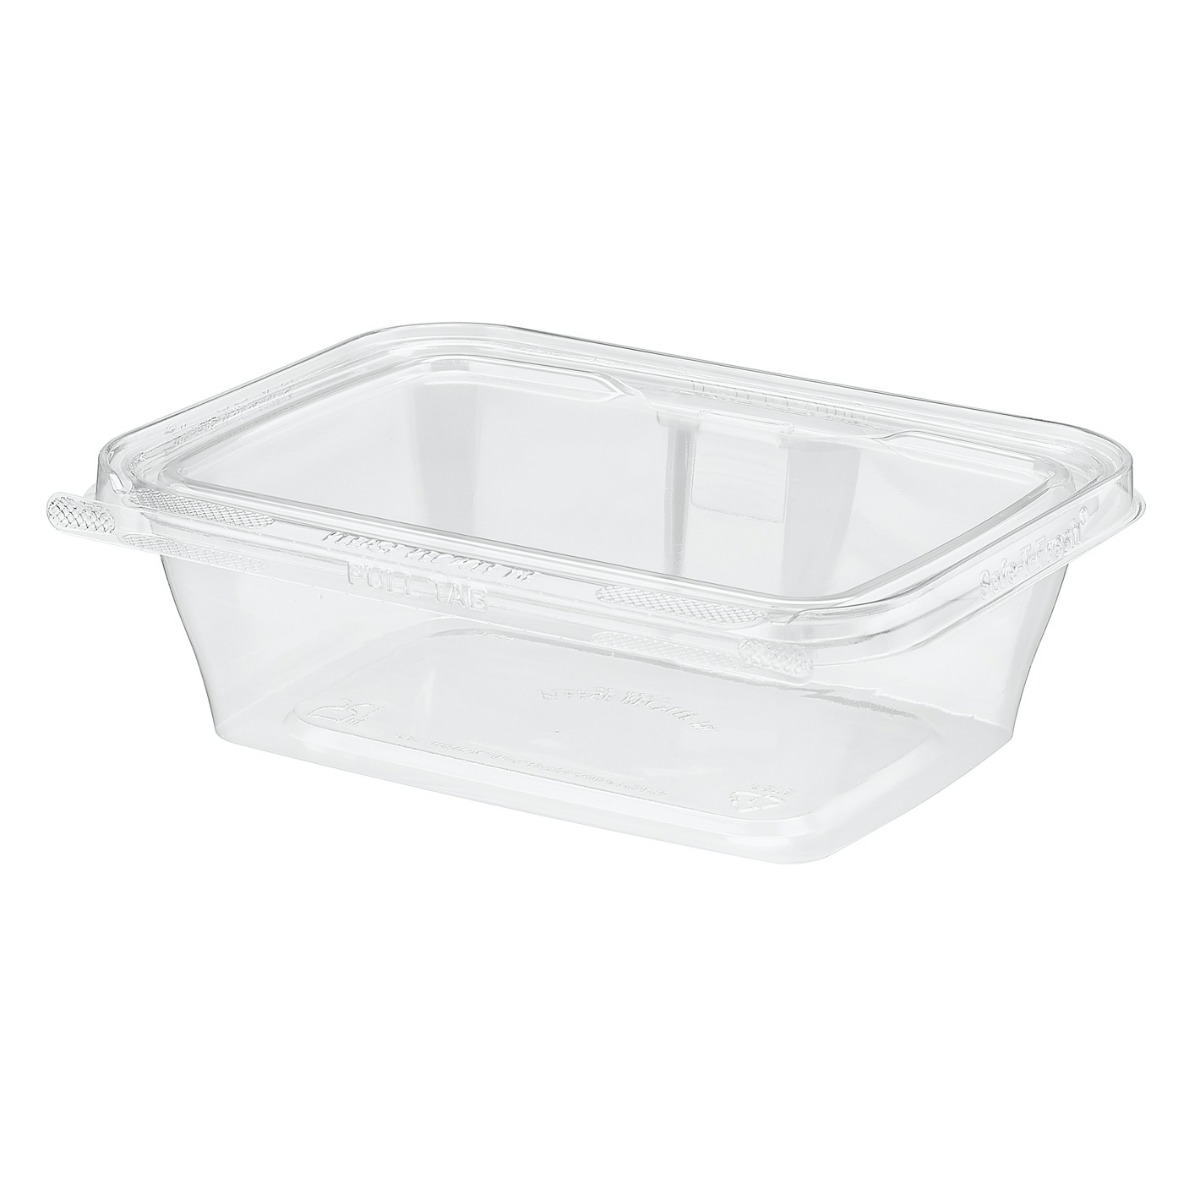 Container, To Go, Combo, LDPE, 33 Oz, Black, Rect, 3-Comp, 150 –  AmerCareRoyal